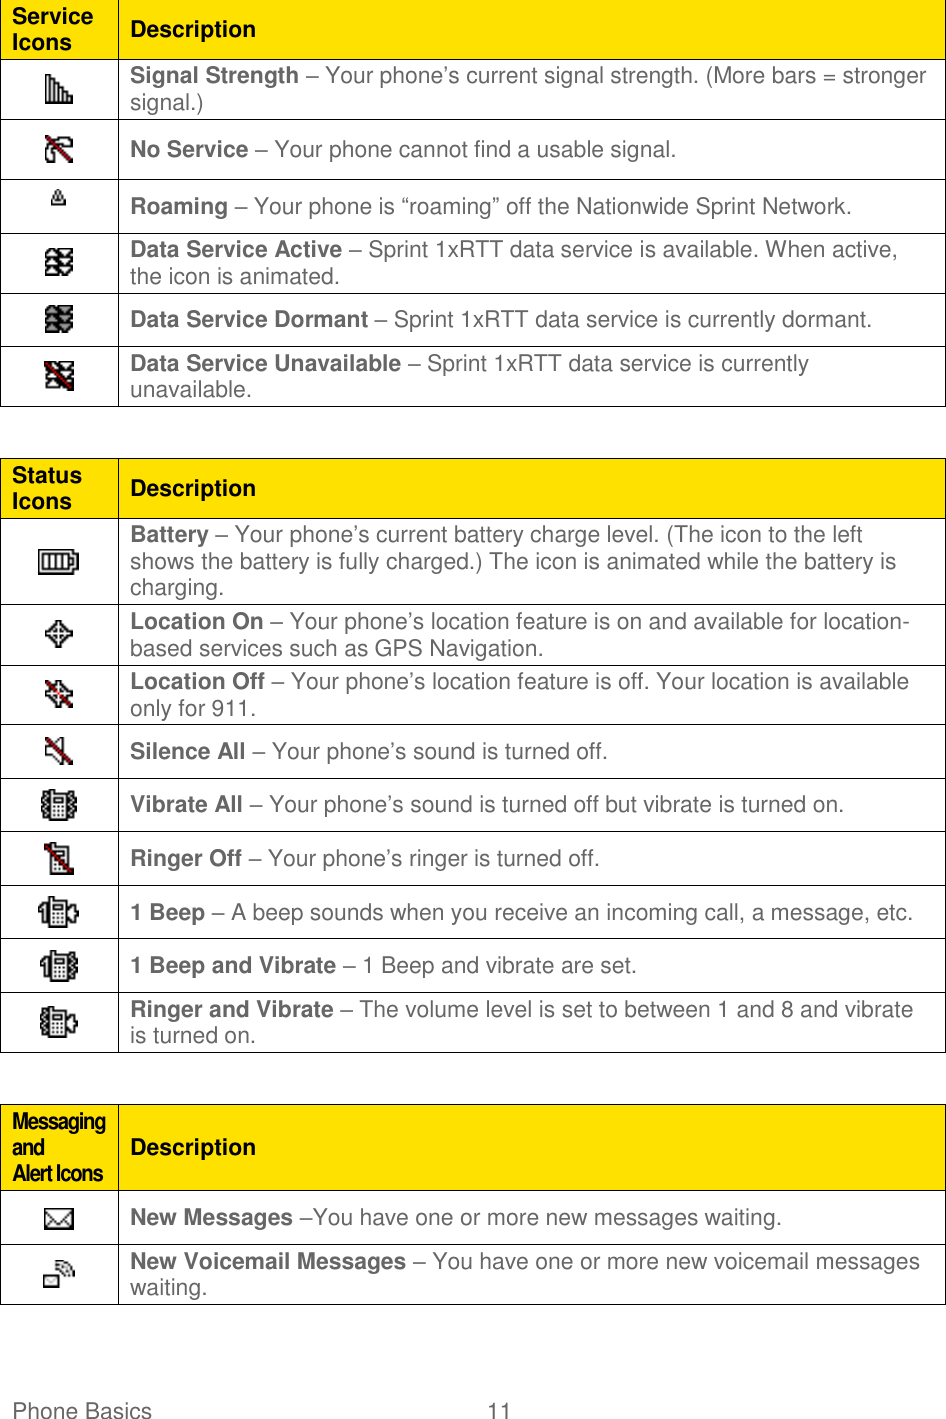 Phone Basics  11   Service Icons Description  Signal Strength – Your phone’s current signal strength. (More bars = stronger signal.)  No Service – Your phone cannot find a usable signal.  Roaming – Your phone is “roaming” off the Nationwide Sprint Network.  Data Service Active – Sprint 1xRTT data service is available. When active, the icon is animated.  Data Service Dormant – Sprint 1xRTT data service is currently dormant.  Data Service Unavailable – Sprint 1xRTT data service is currently unavailable.  Status Icons Description  Battery – Your phone’s current battery charge level. (The icon to the left shows the battery is fully charged.) The icon is animated while the battery is charging.  Location On – Your phone’s location feature is on and available for location-based services such as GPS Navigation.  Location Off – Your phone’s location feature is off. Your location is available only for 911.  Silence All – Your phone’s sound is turned off.  Vibrate All – Your phone’s sound is turned off but vibrate is turned on.  Ringer Off – Your phone’s ringer is turned off.  1 Beep – A beep sounds when you receive an incoming call, a message, etc.  1 Beep and Vibrate – 1 Beep and vibrate are set.  Ringer and Vibrate – The volume level is set to between 1 and 8 and vibrate is turned on.  Messaging and  Alert Icons Description  New Messages –You have one or more new messages waiting.  New Voicemail Messages – You have one or more new voicemail messages waiting. 